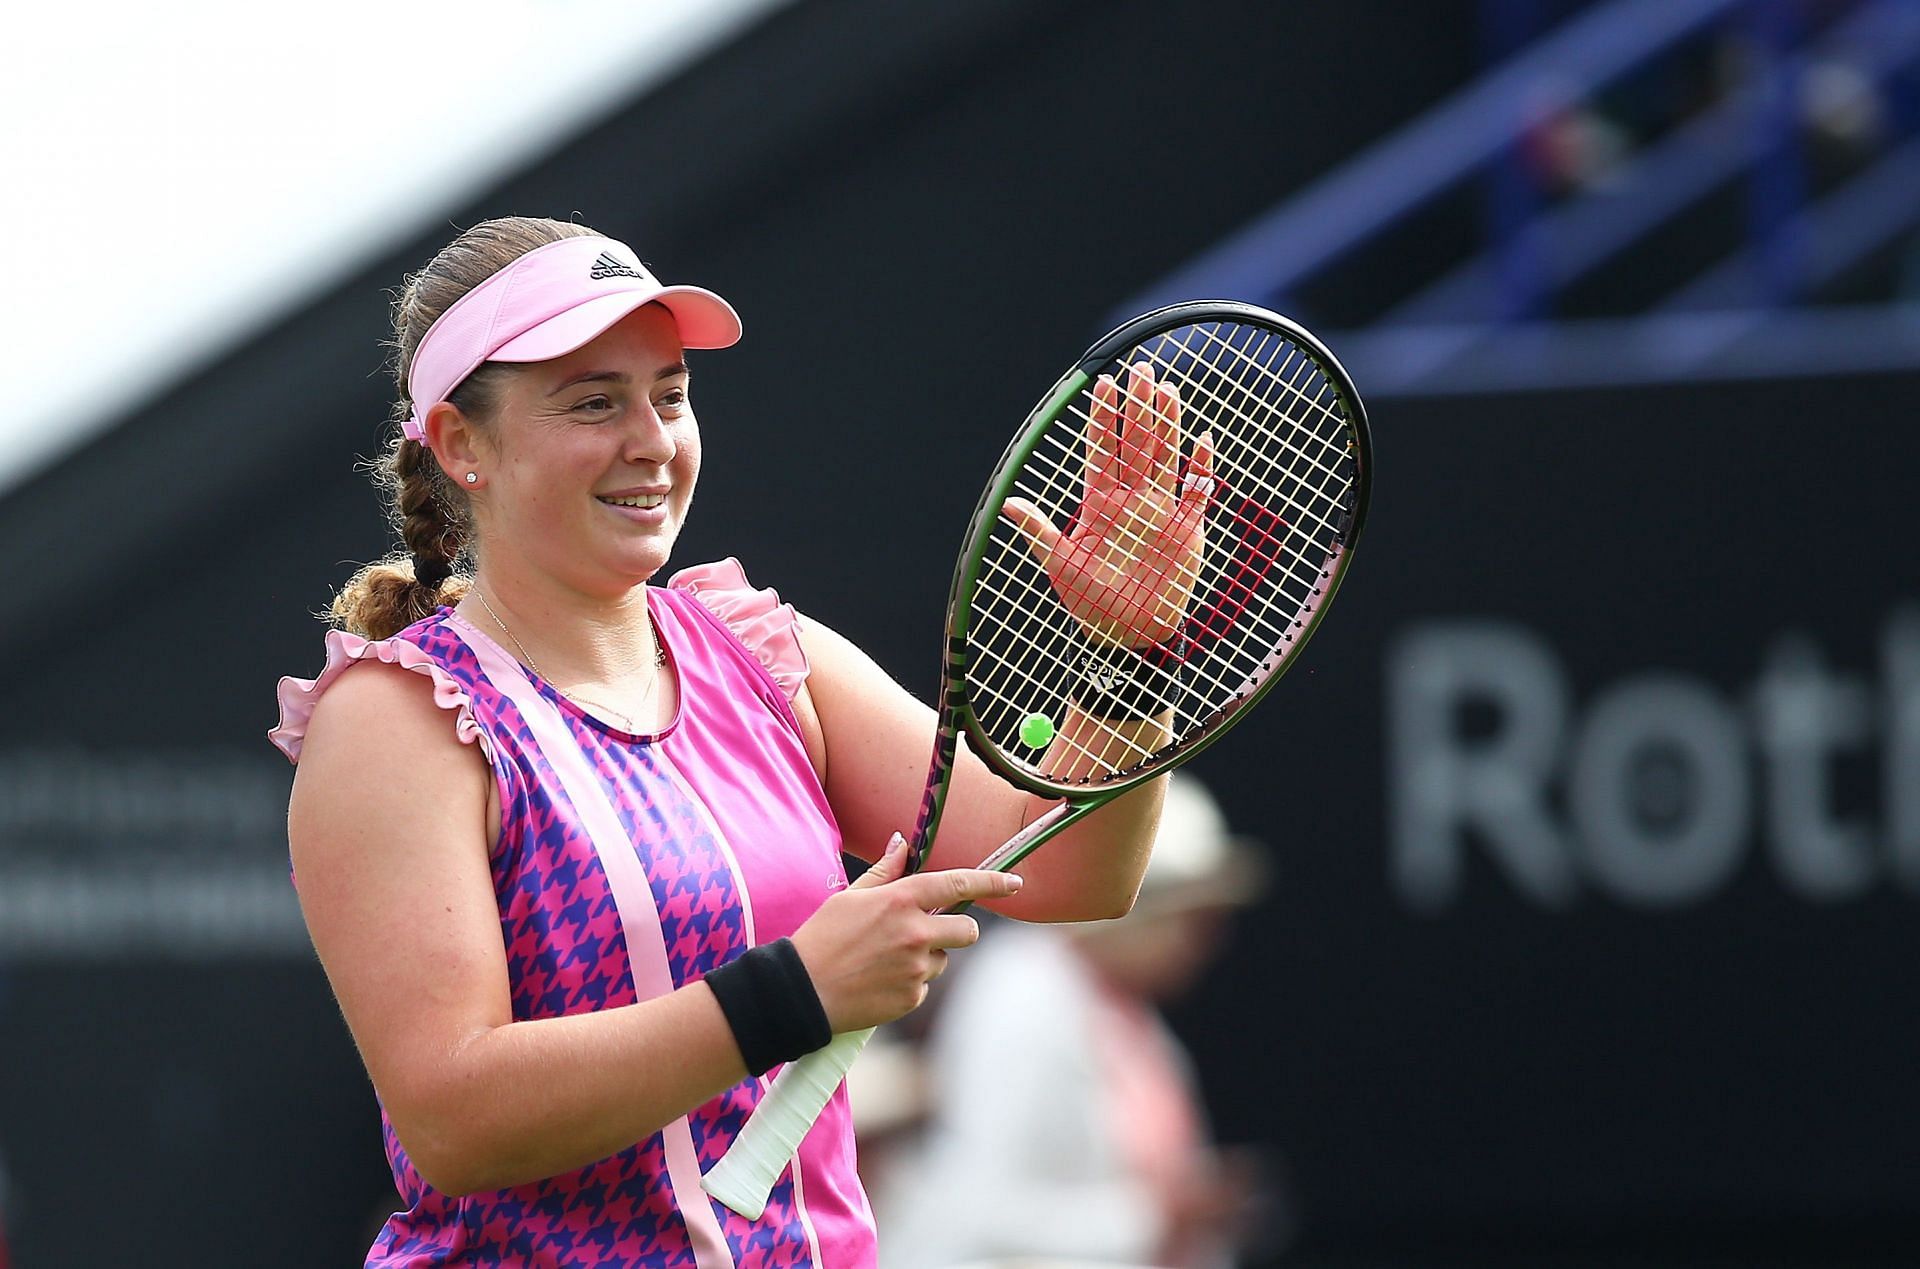 Ostapenko will be a heavy favorite to come through.